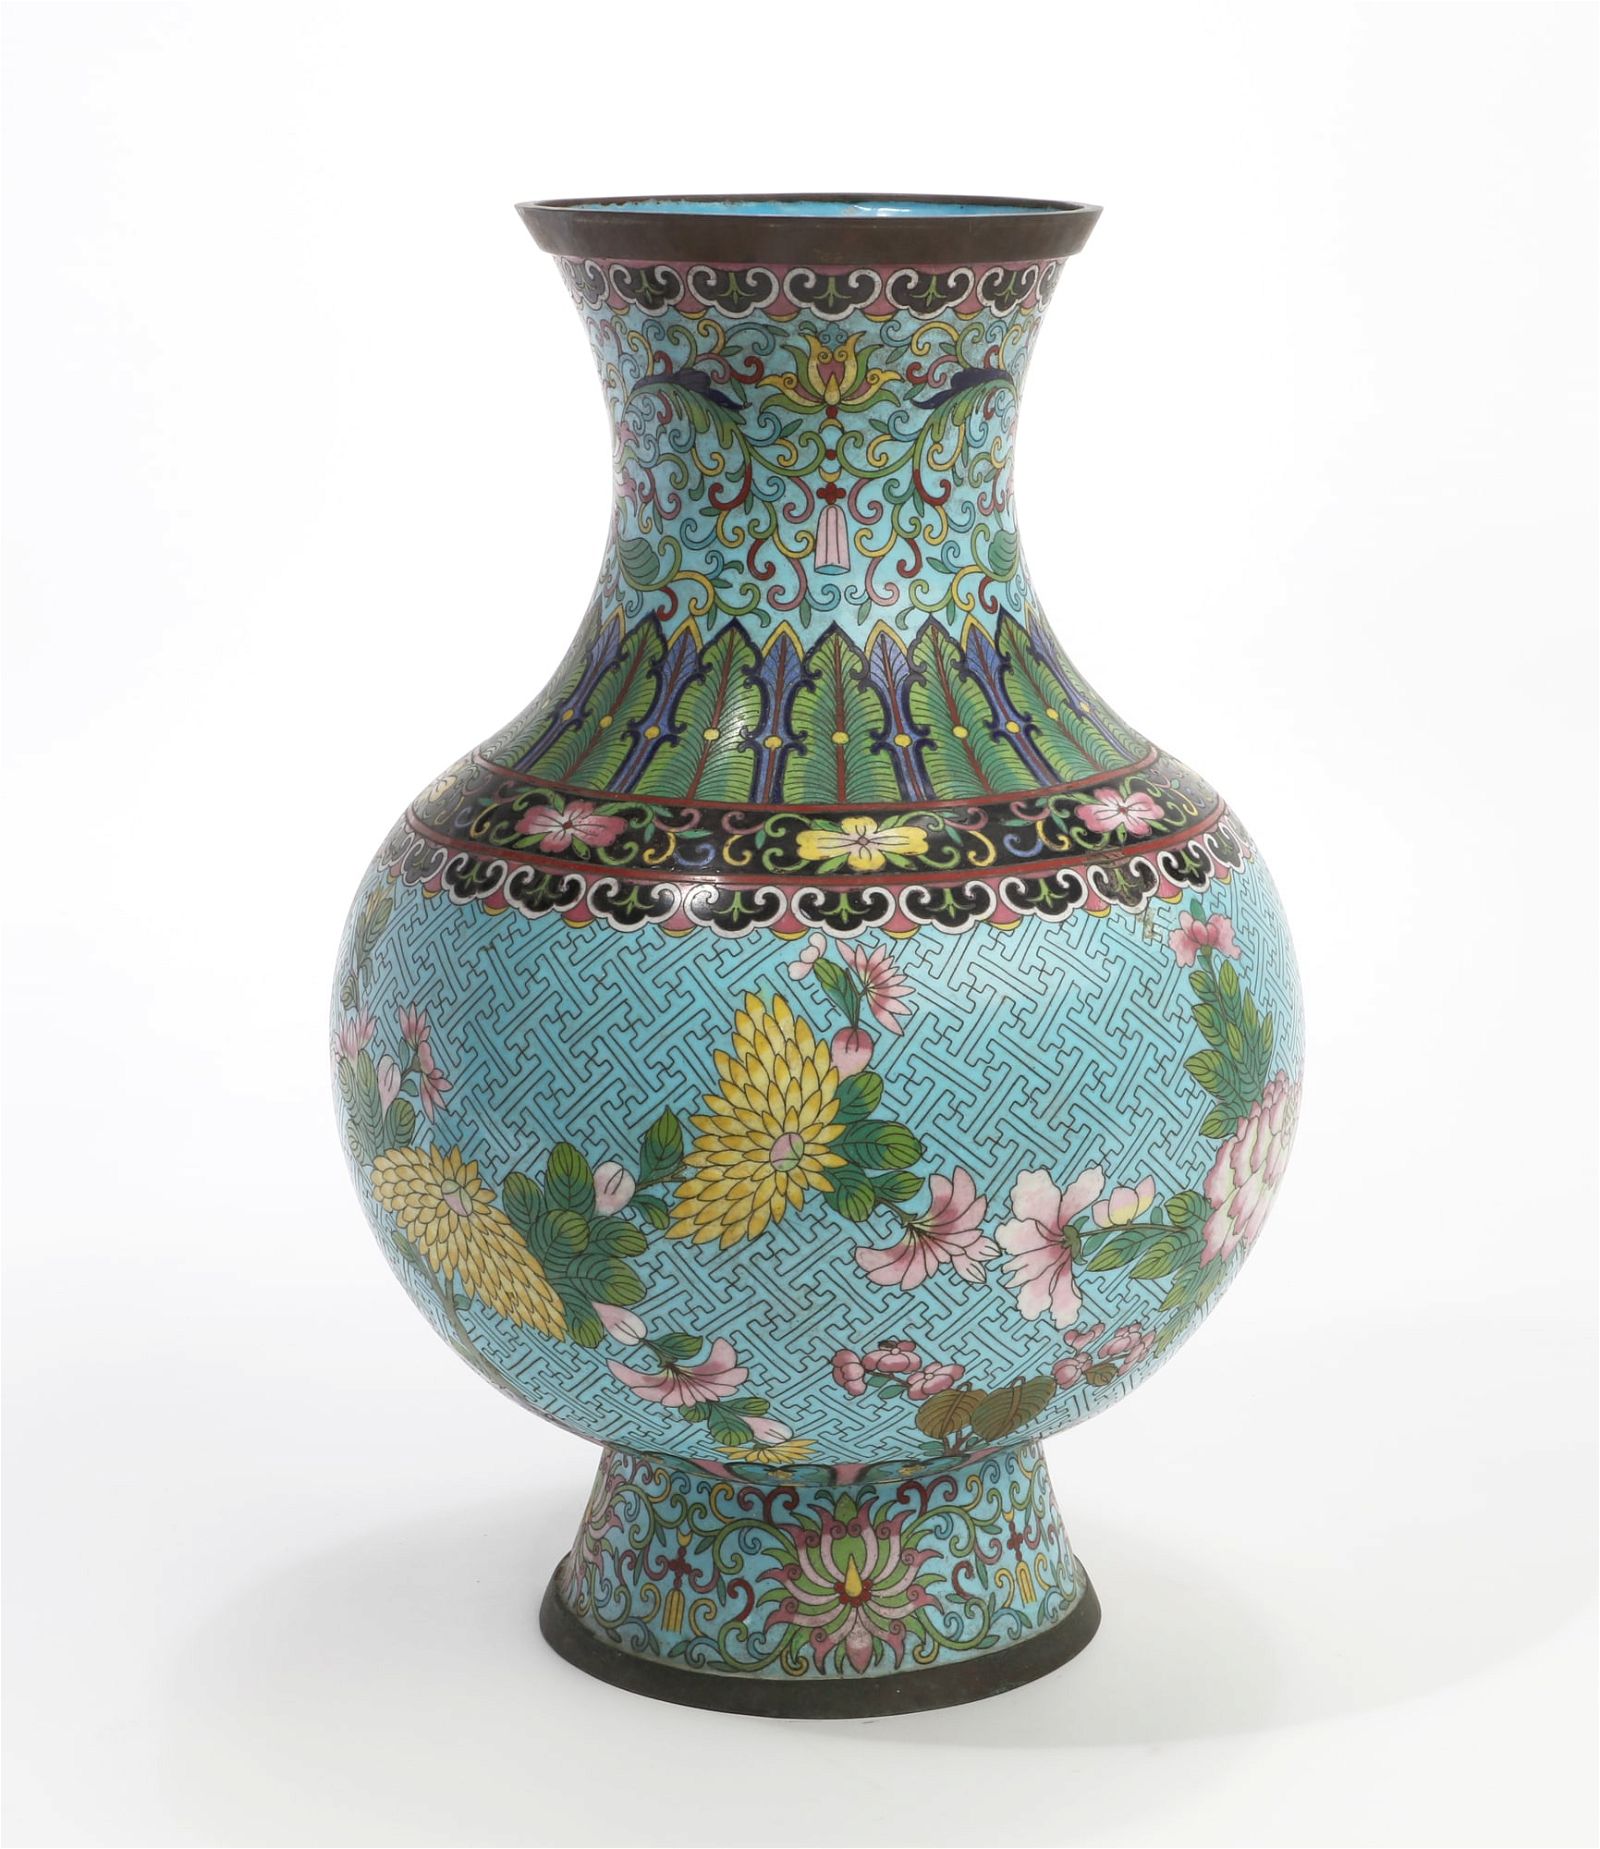 A CHINESE CLOISONNE VASEA Chinese cloisonne